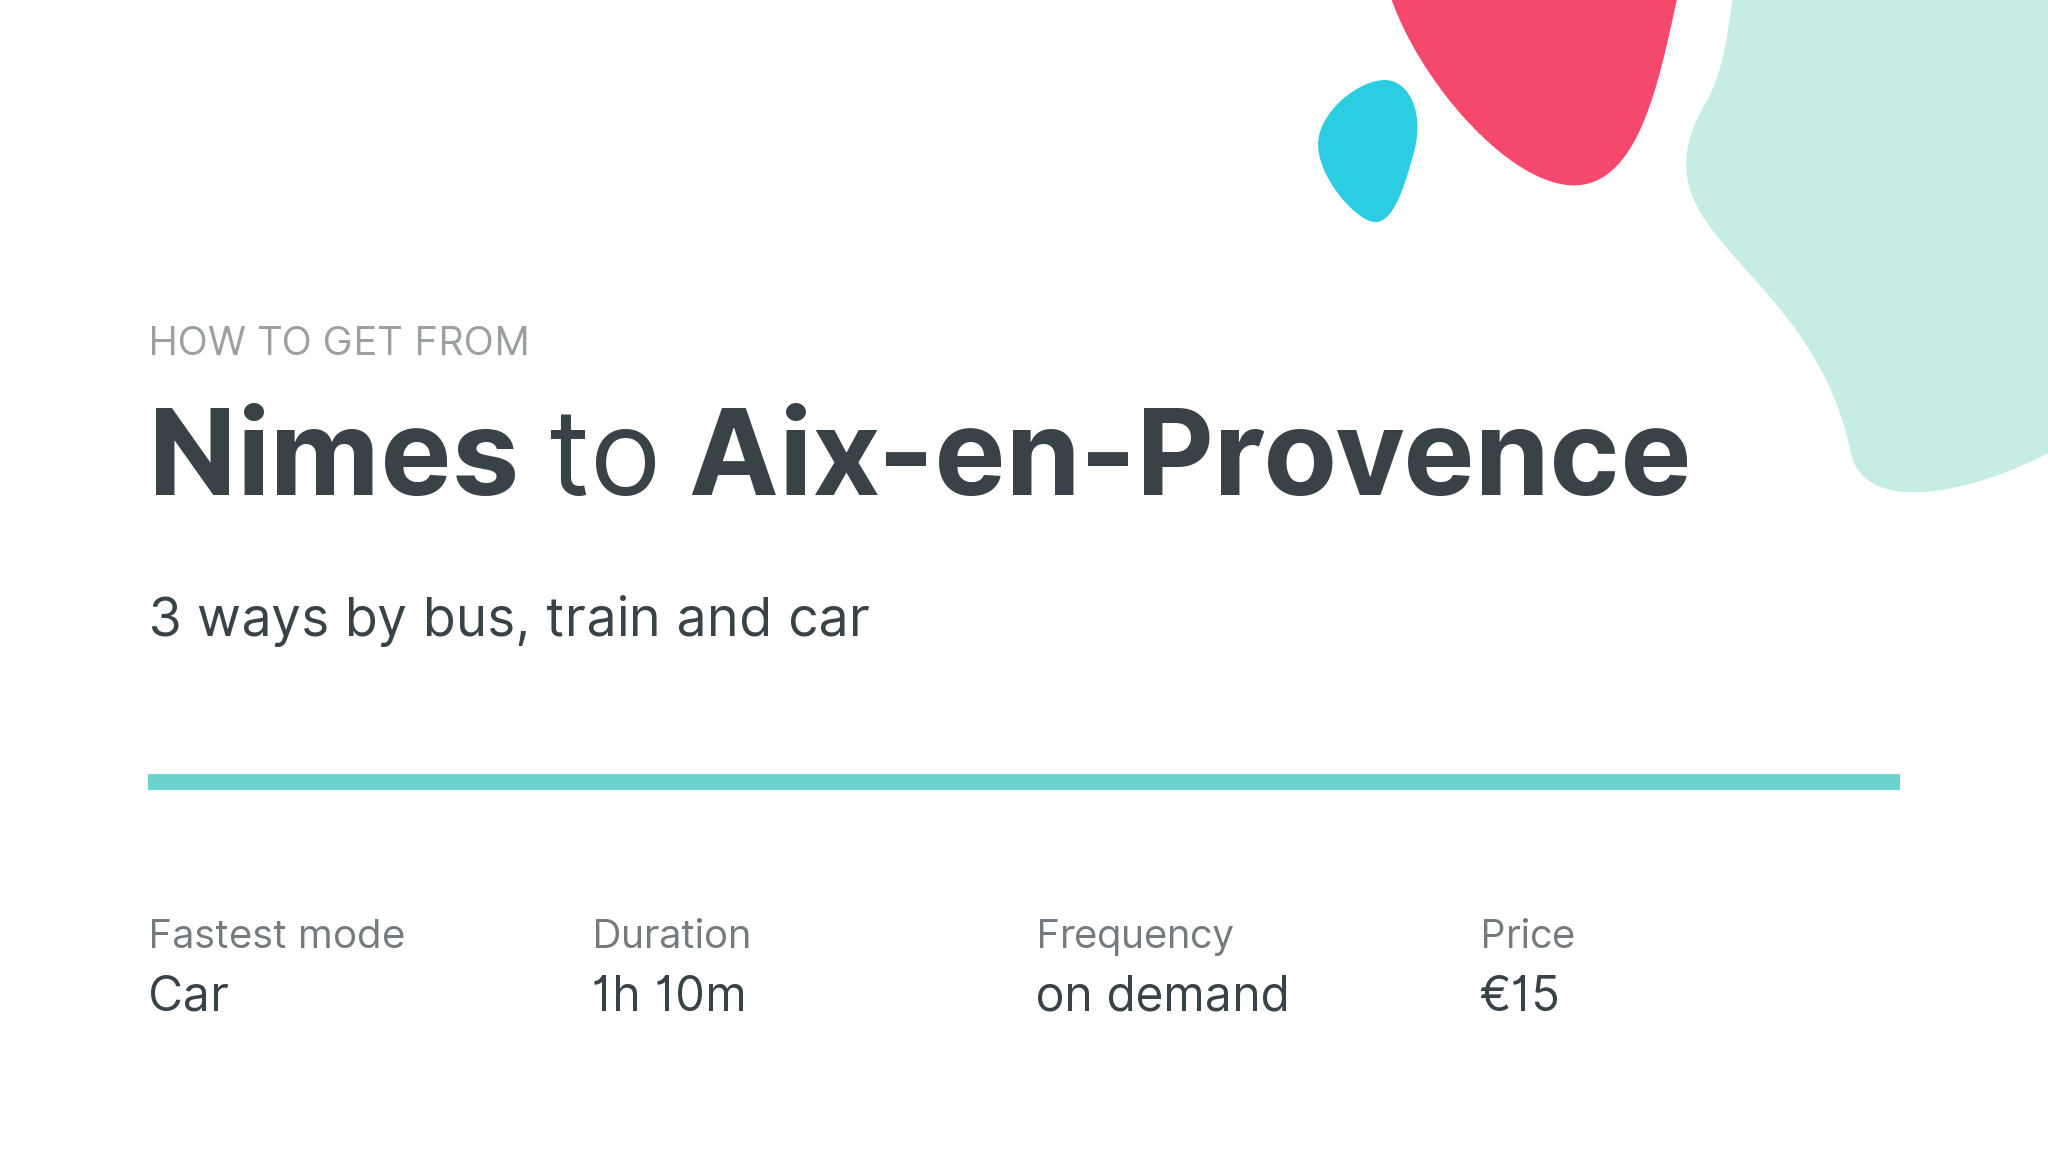 How do I get from Nimes to Aix-en-Provence